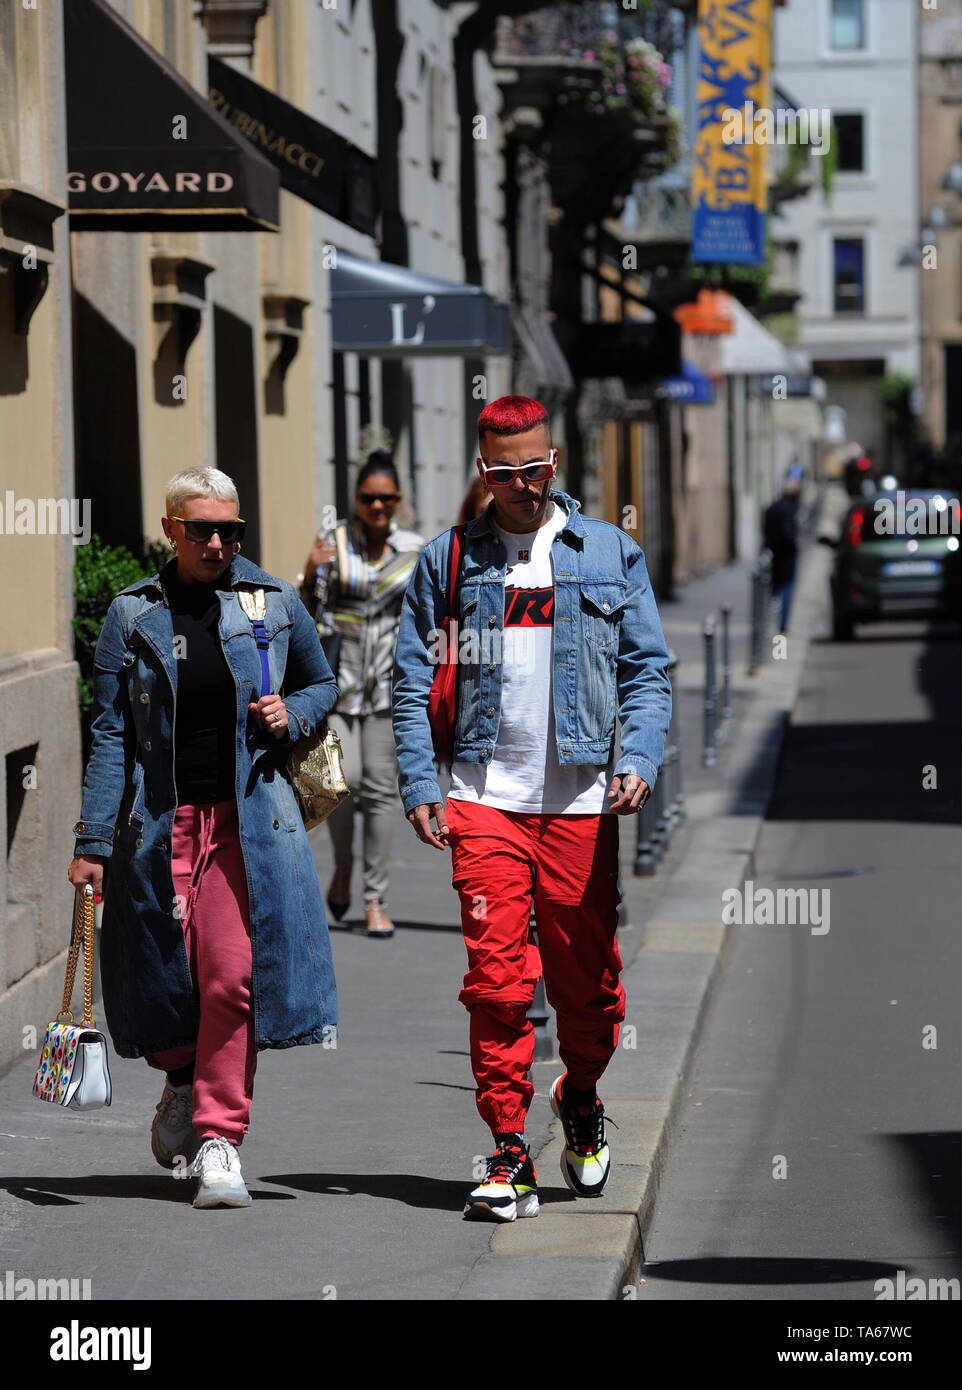 Milan, Sfera It took a lunch with a mysterious girl The rapper SFERA EBBASTA  caught lunch with a mysterious girl in a well-known restaurant in the  center. As soon as he notices